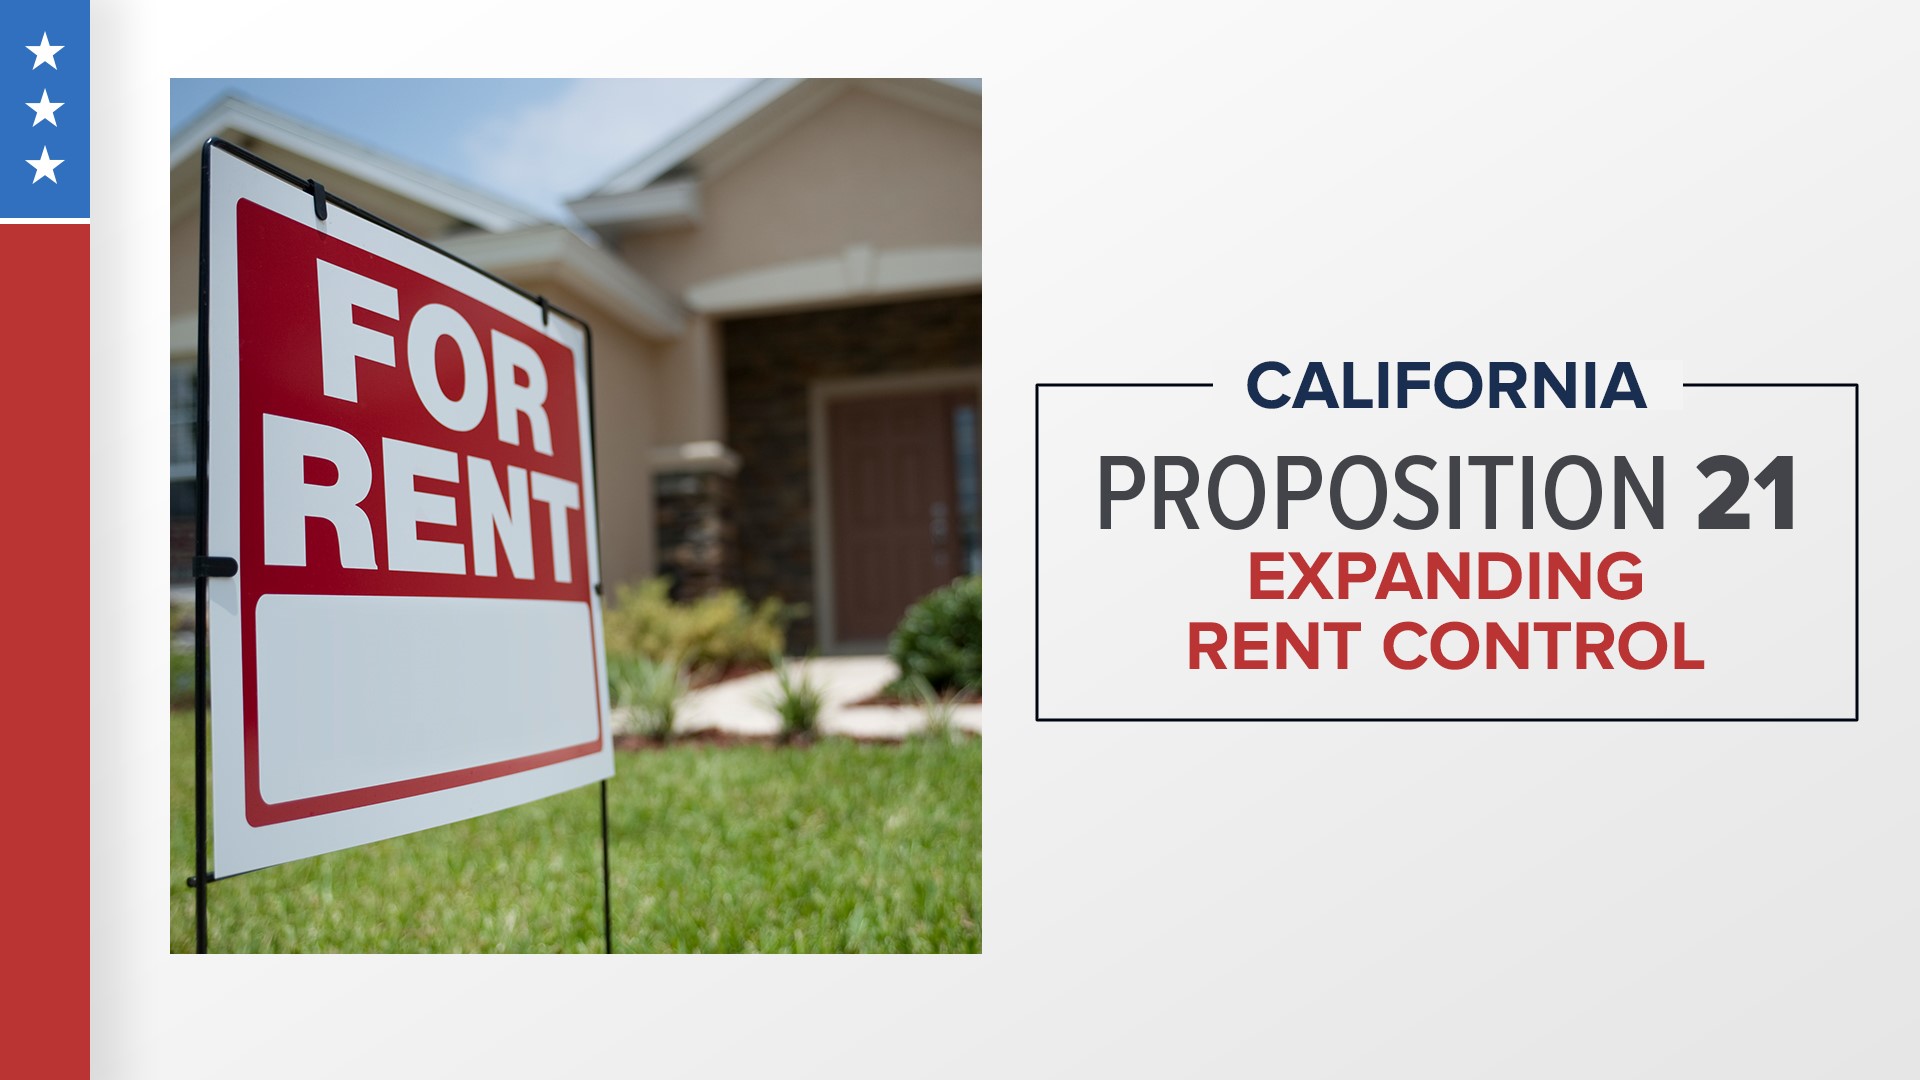 The measure would allow cities throughout the state to pass rent control. Voters turned down a similar measure in 2018, but things may be different this year.